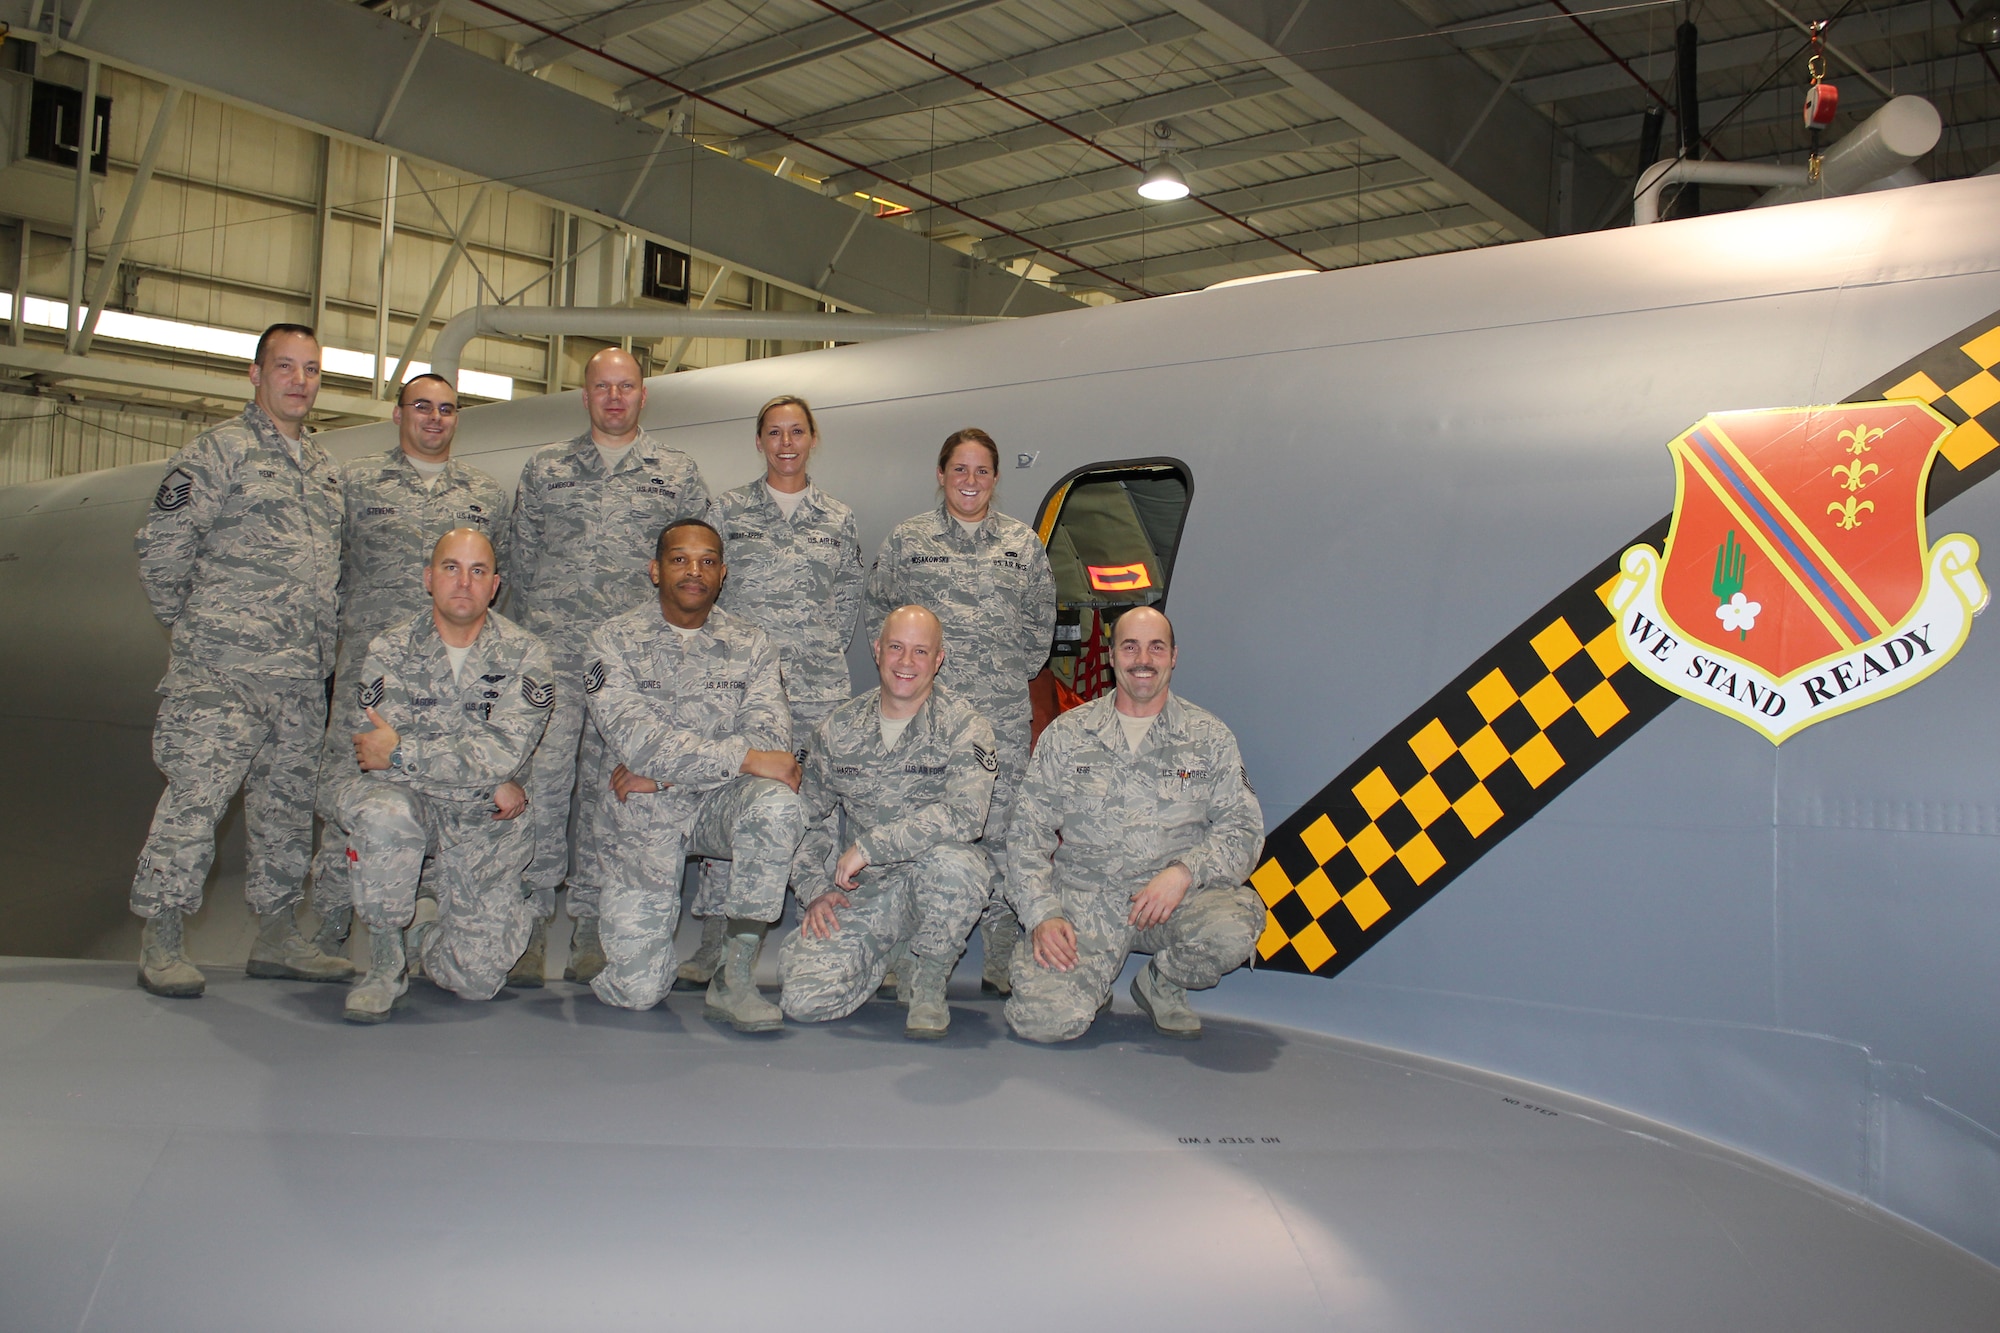 Airmen from the 191st Maintenance Squadron are seen on the wing of a KC-135 Stratotanker aircraft at Selfridge Air National Guard Base, Mich., Dec. 15,2011, next to a newly-painted 127th Wing shield and a checkerboard stripe. The aircraft was painted with the stripe and related detailing that honors both the heritage of the Michigan Air National Guard and the former Strategic Air Command, which once operated at Selfridge. (U.S. Air Force photo by TSgt. Dan Heaton)